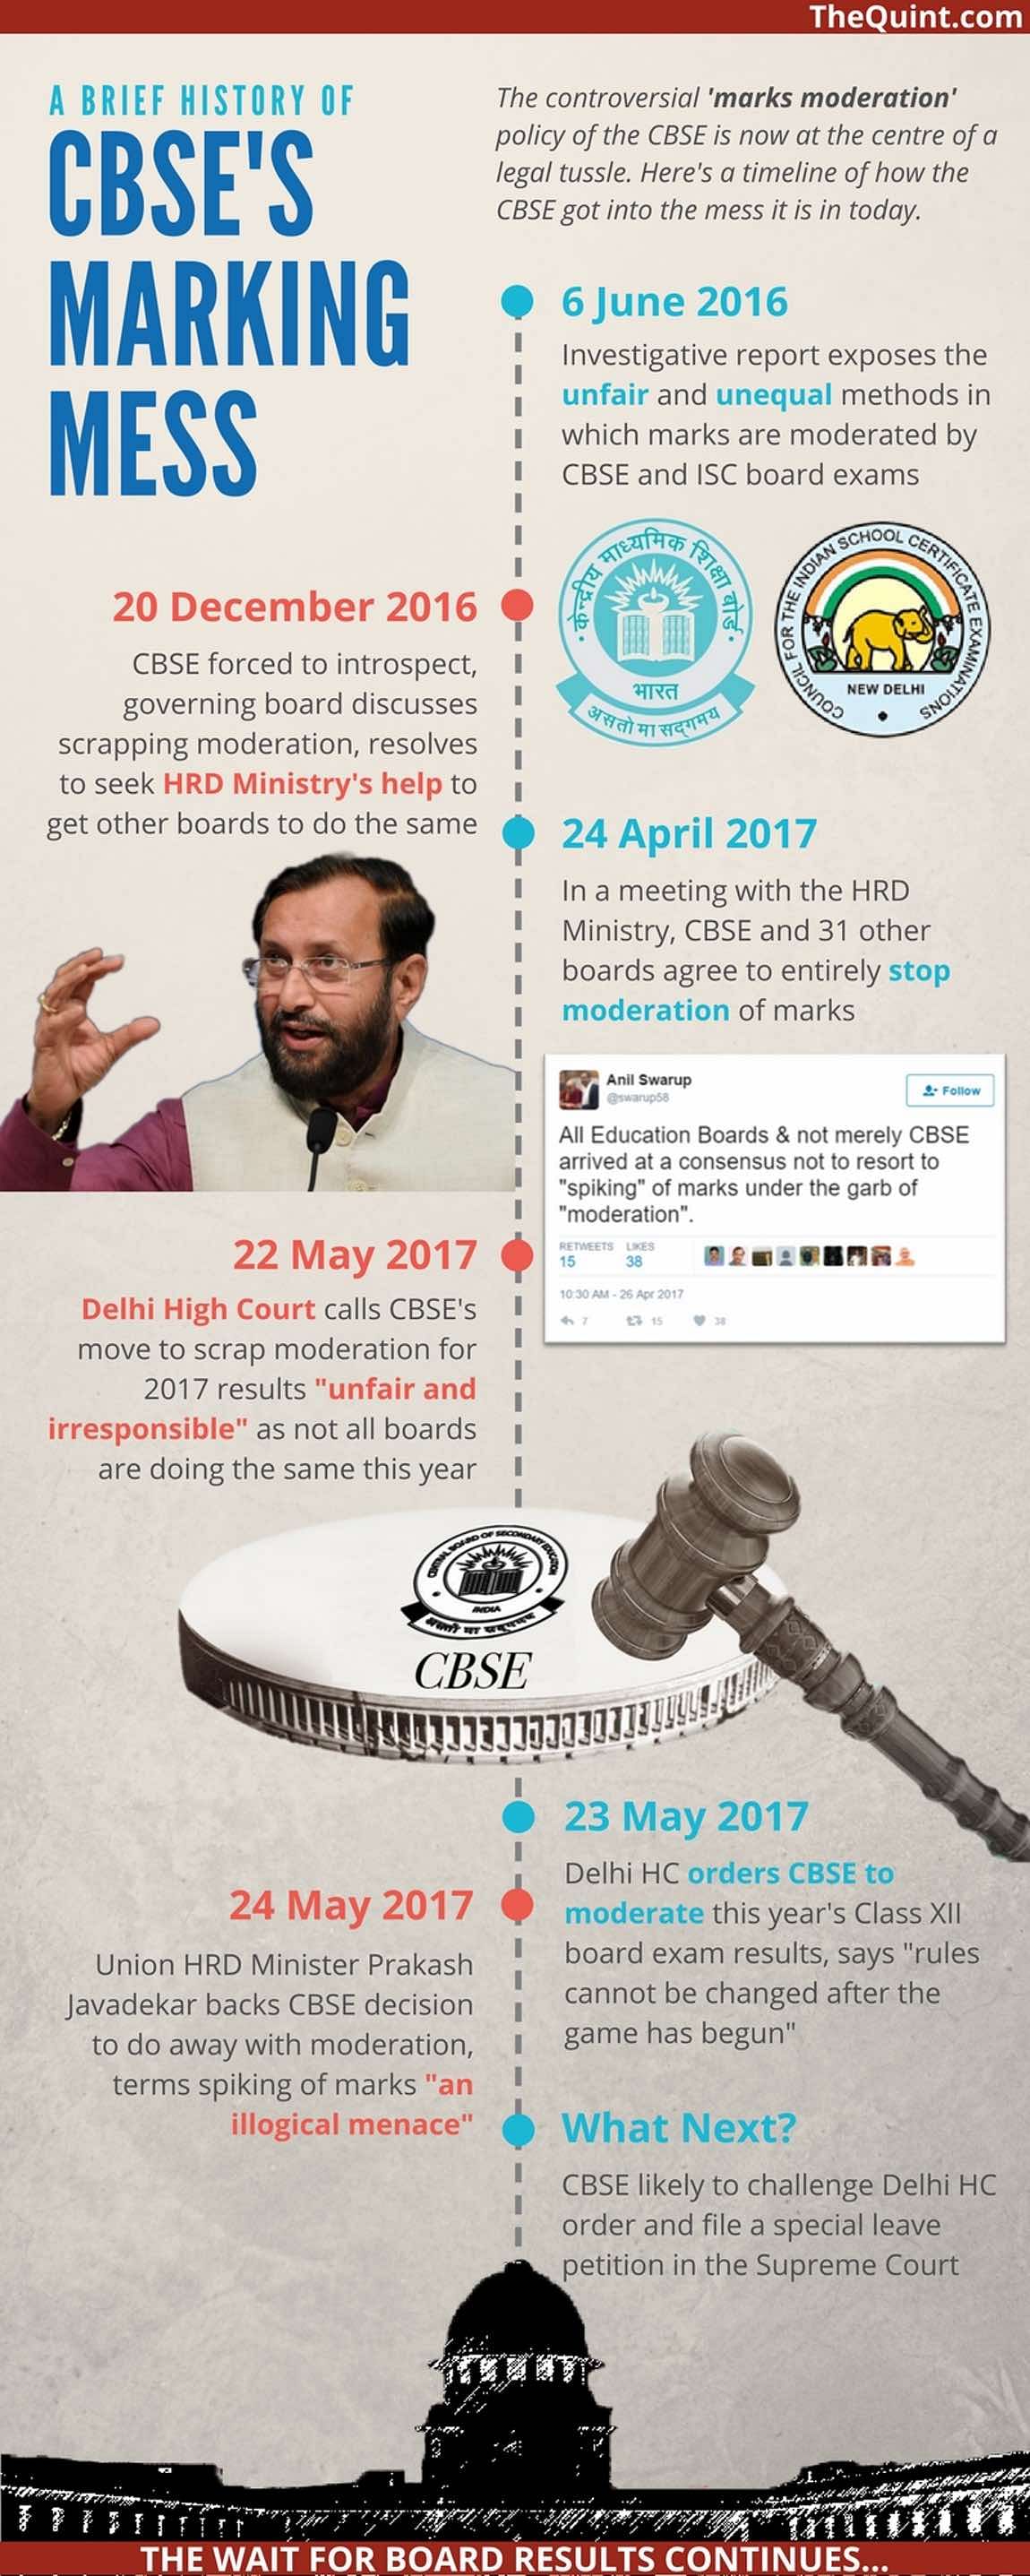 “Don’t worry about Delhi High Court’s order, justice will be done for all,” Prakash Javadekar said.